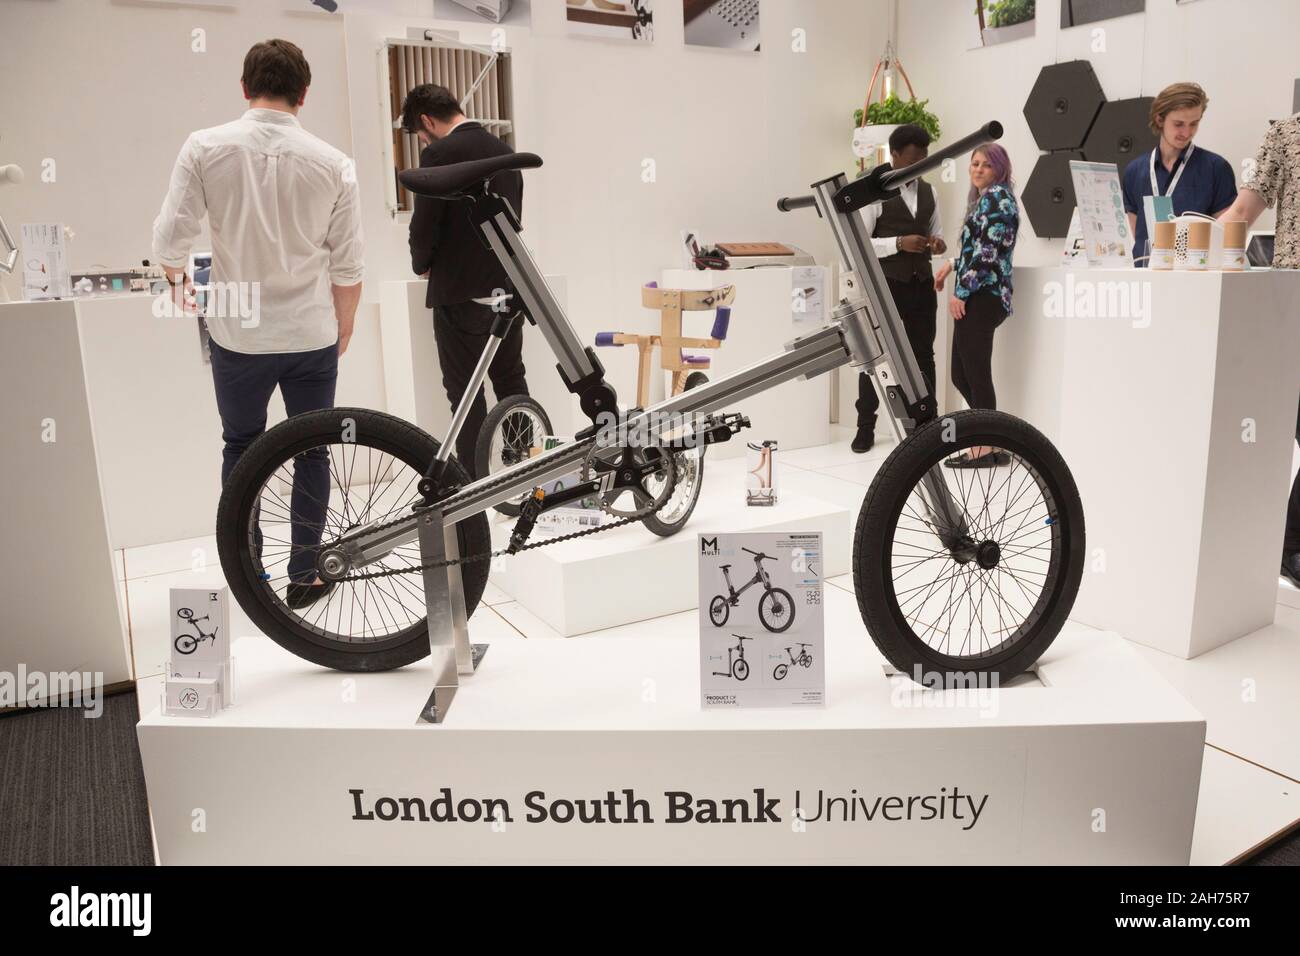 London, UK. 6 July 2016. A modular bike that can be put together with Allen Keys is featured at the London South Bank University stand. New Designers, the most important emerging design event in the UK, takes place at the Business Design Centre from 6 to July 2016. Showcasing the excellence of art and design education in the UK, New Designers 2016 welcomes over 3000 of this year's most creative and talented design graduates. Stock Photo